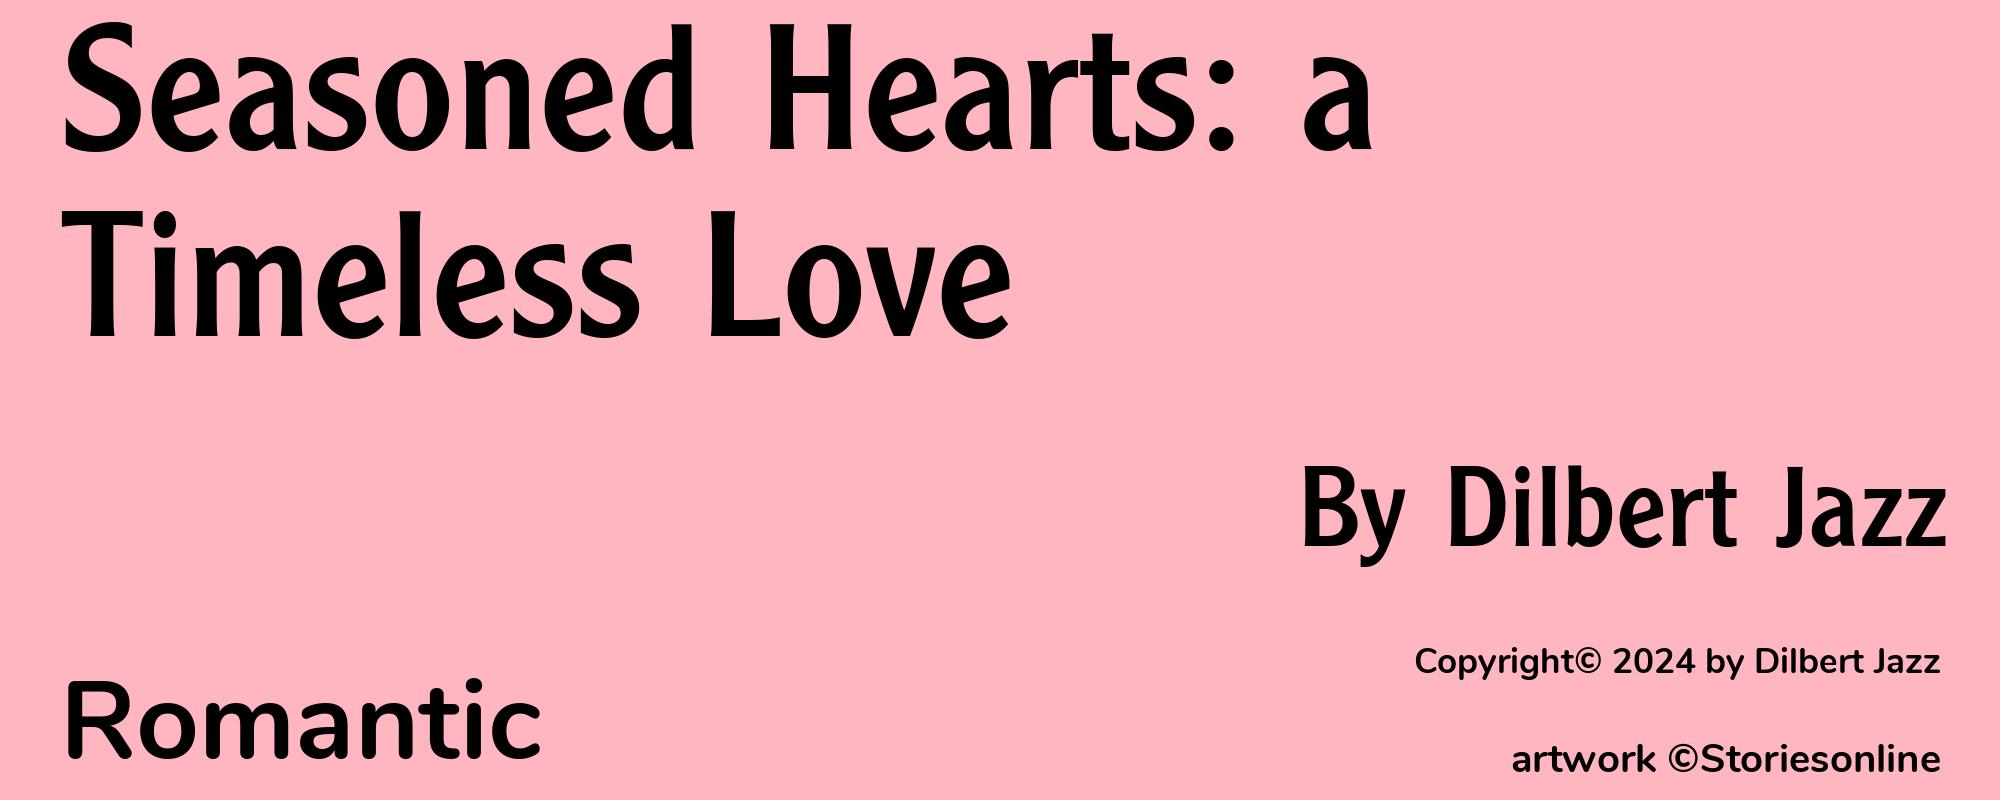 Seasoned Hearts: a Timeless Love - Cover